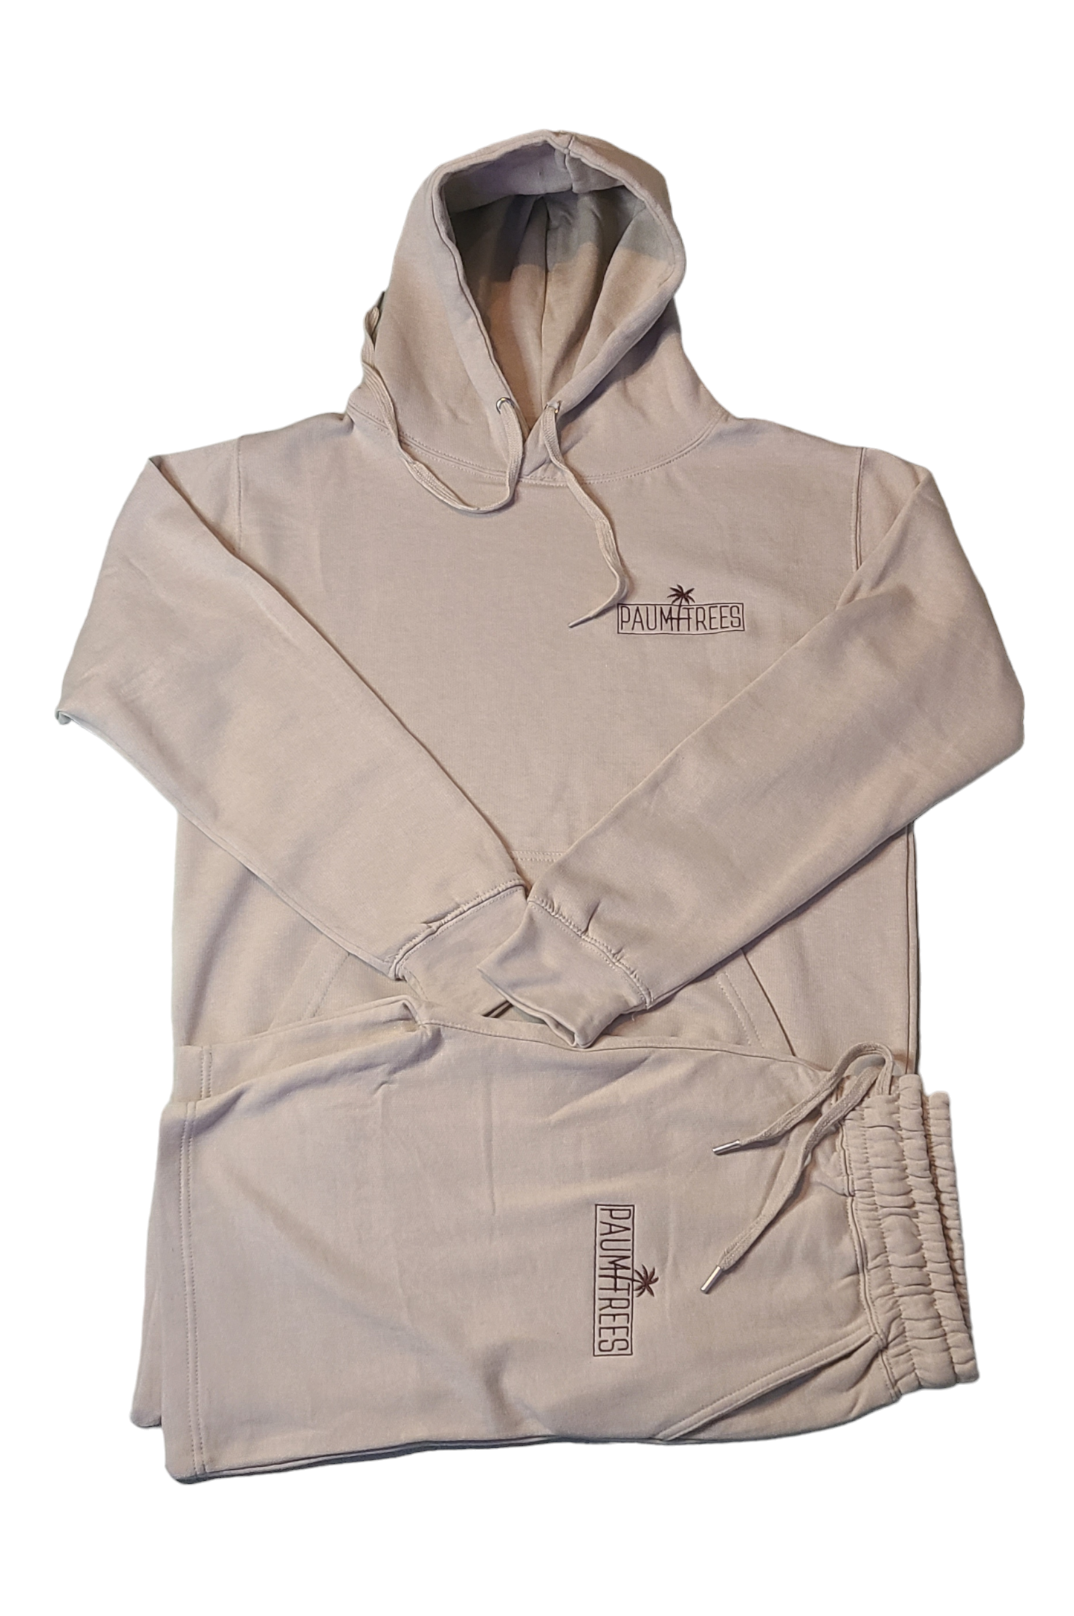 New!! Earth tone Ensemble Sweat suit or Hoodie short set **Limited time offer**  -Embroidered-